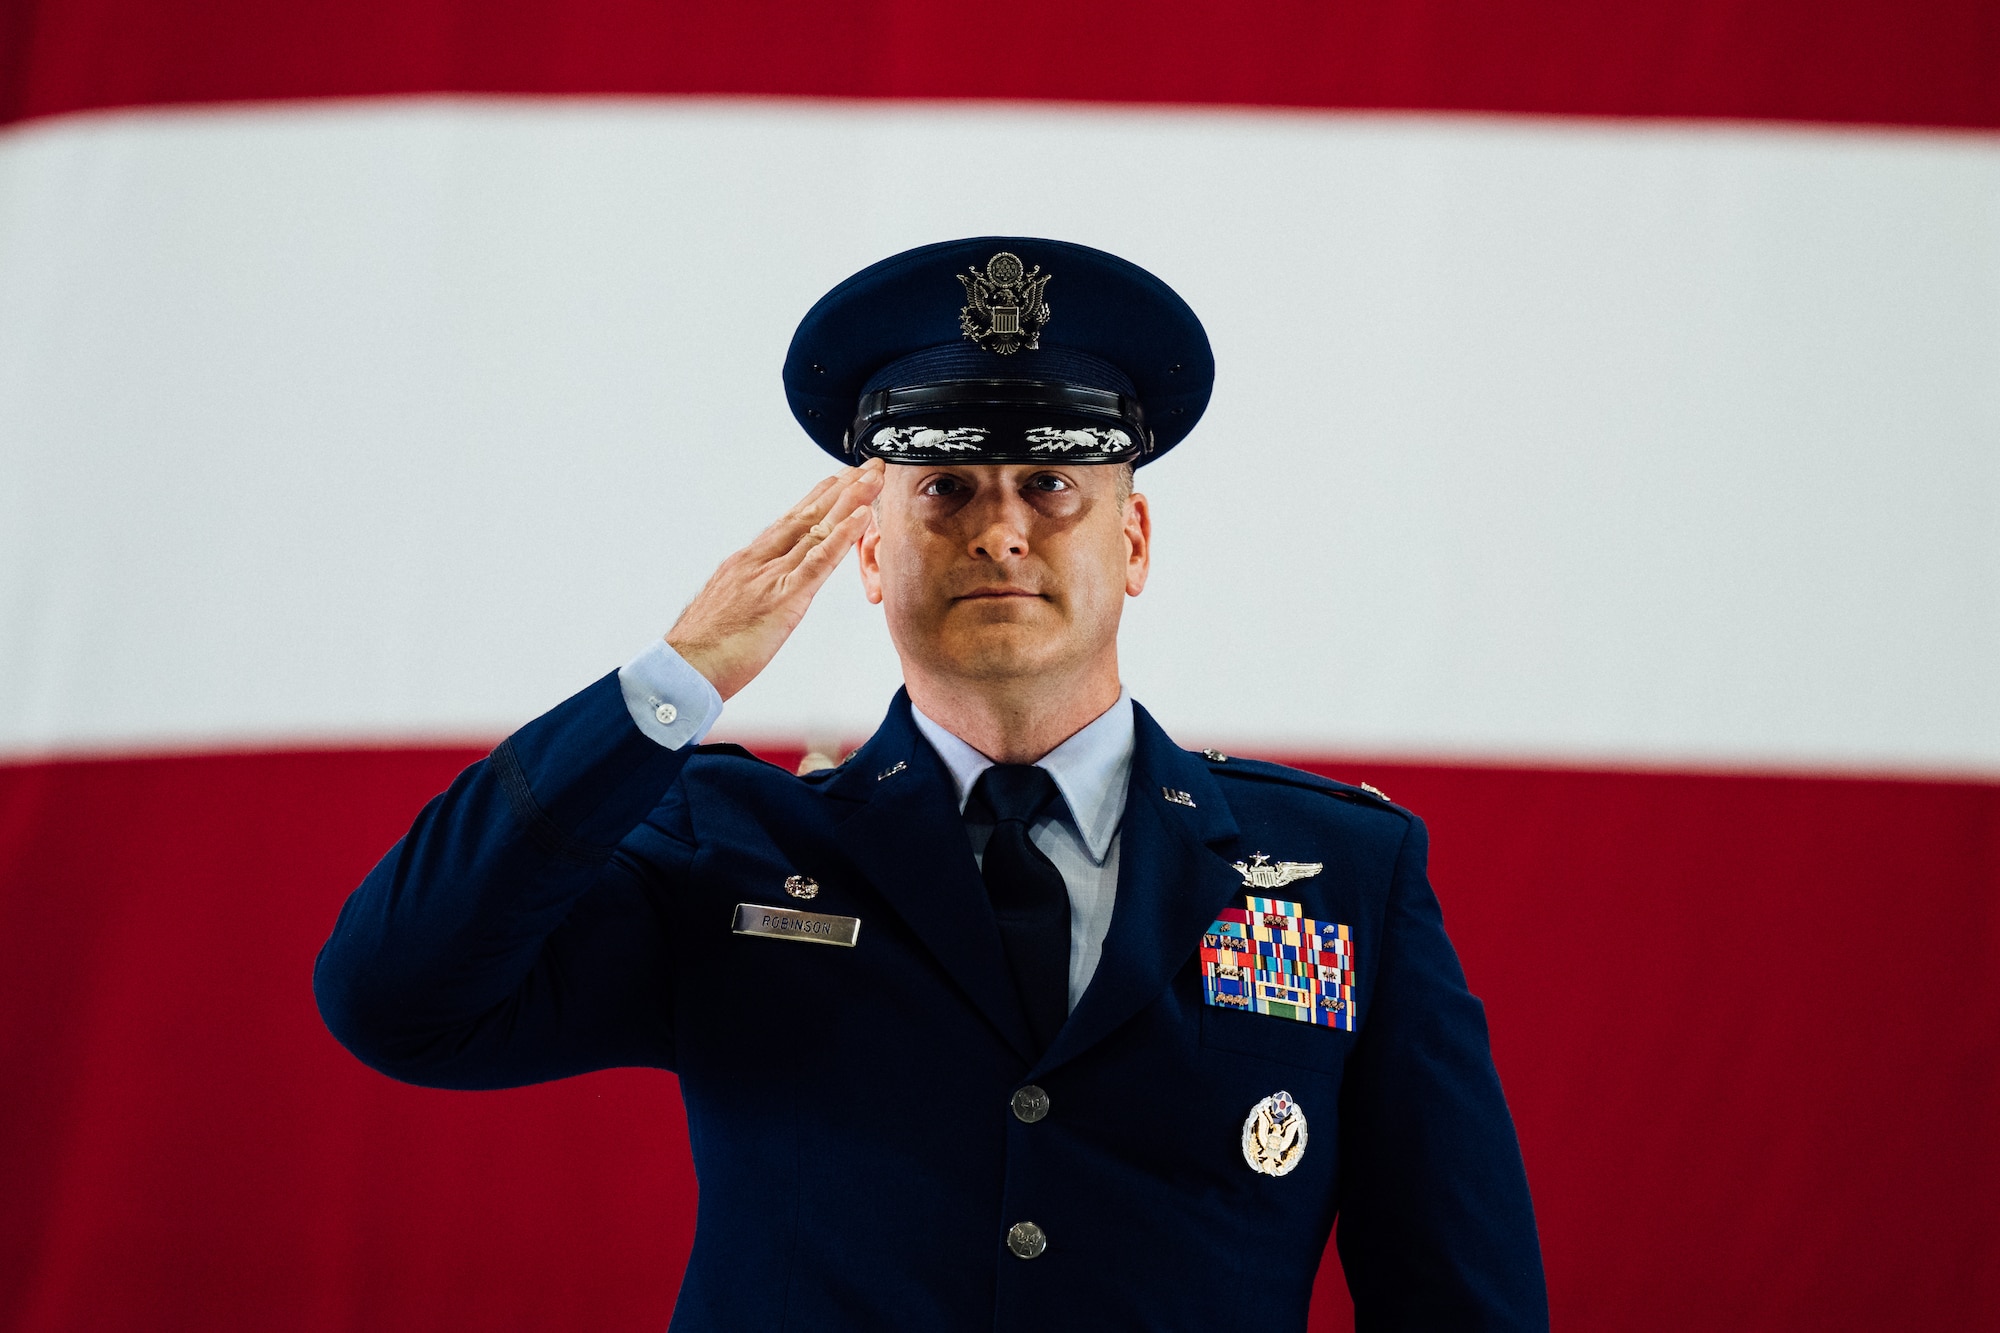 Col. Chris Robinson, 375th Air Mobility Wing commander, renders his first salute to members of Team Scott and the Showcase Wing after assuming command of the 375th AMW on Scott Air Force Base, Illinois, July 1, 2021. The change of command ceremony represents a time-honored military tradition providing an opportunity for Airmen to witness the transfer of power to their newly appointed commanding officer. (U.S. Air Force photo by Tech. Sgt. Jordan Castelan)